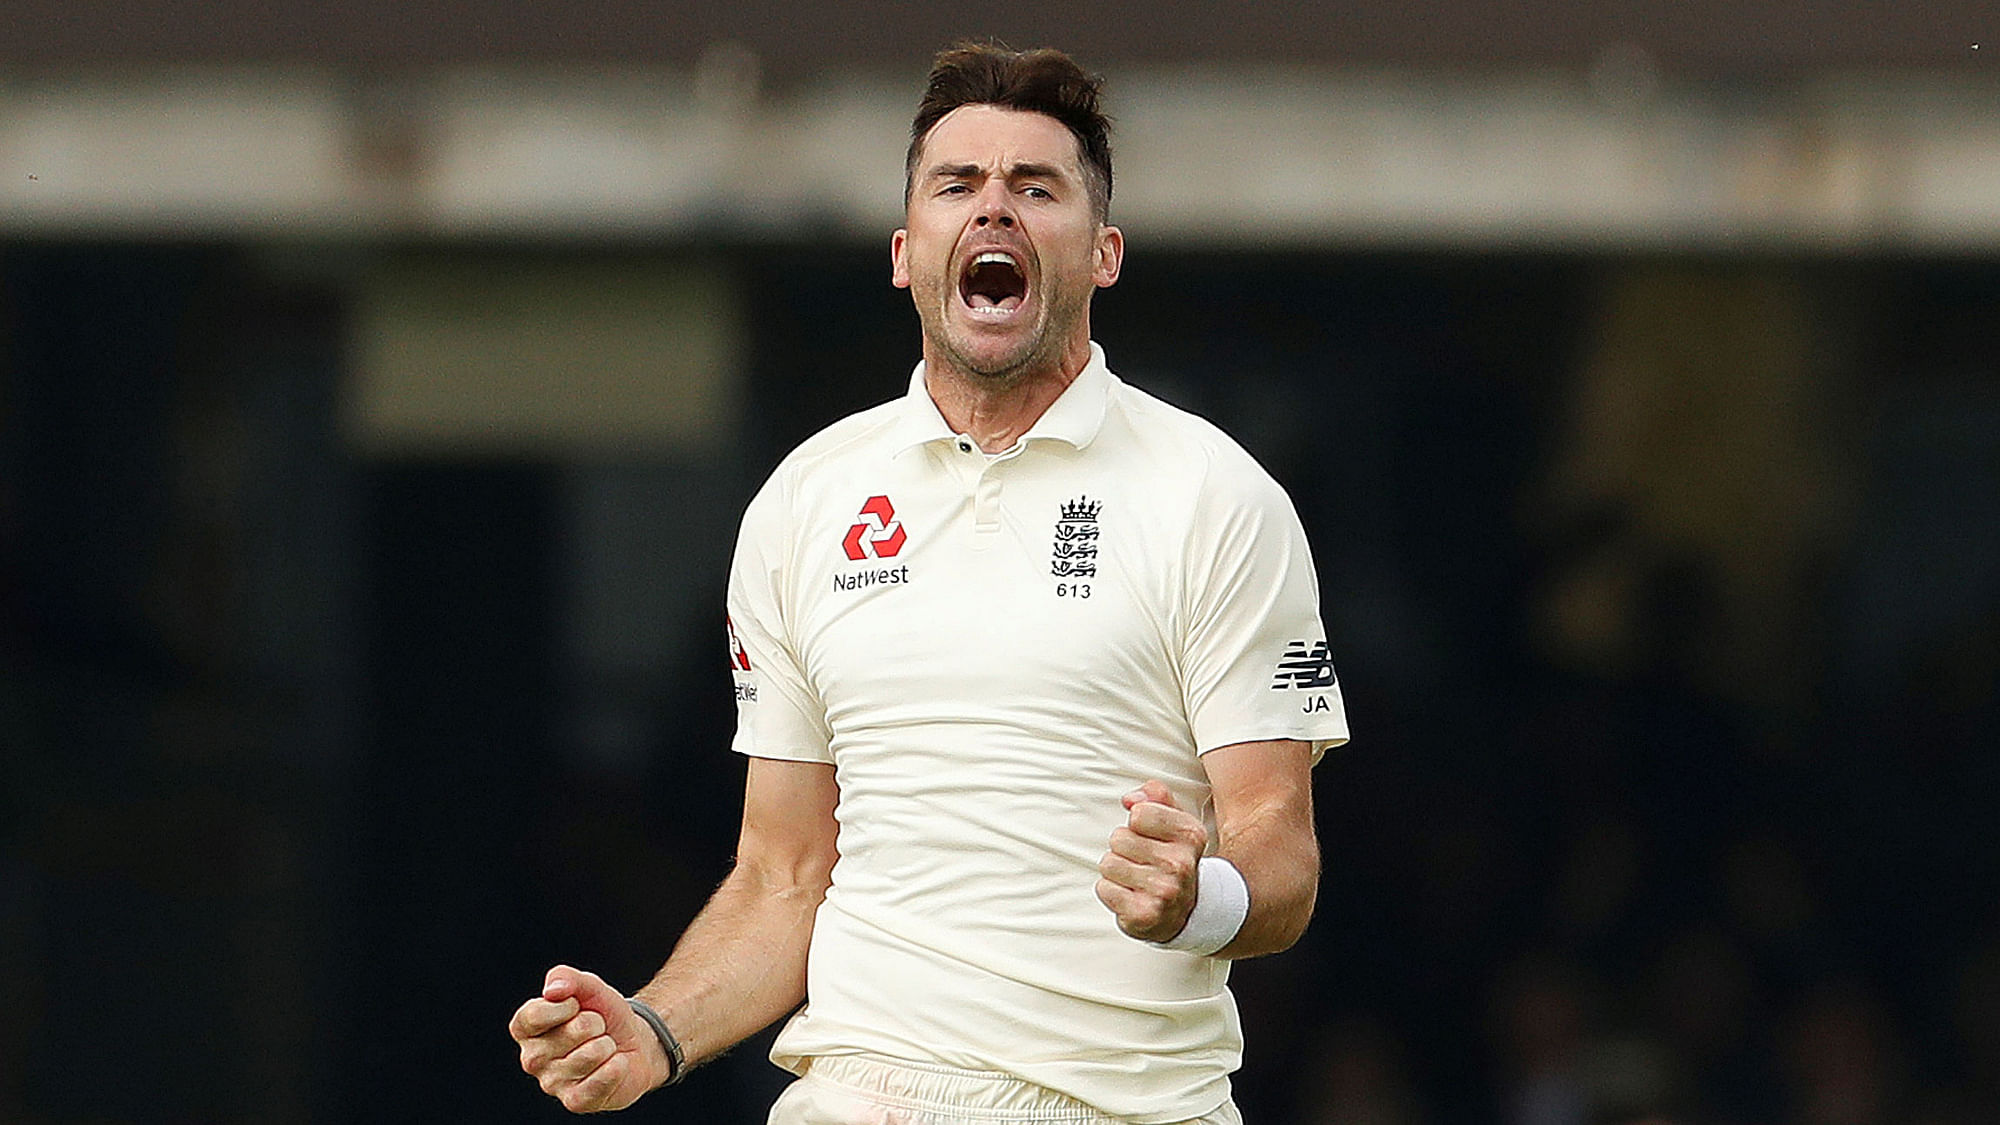 James Anderson believes the enforced break in cricket due to COVID-19 pandemic could prolong his career by an year or two.